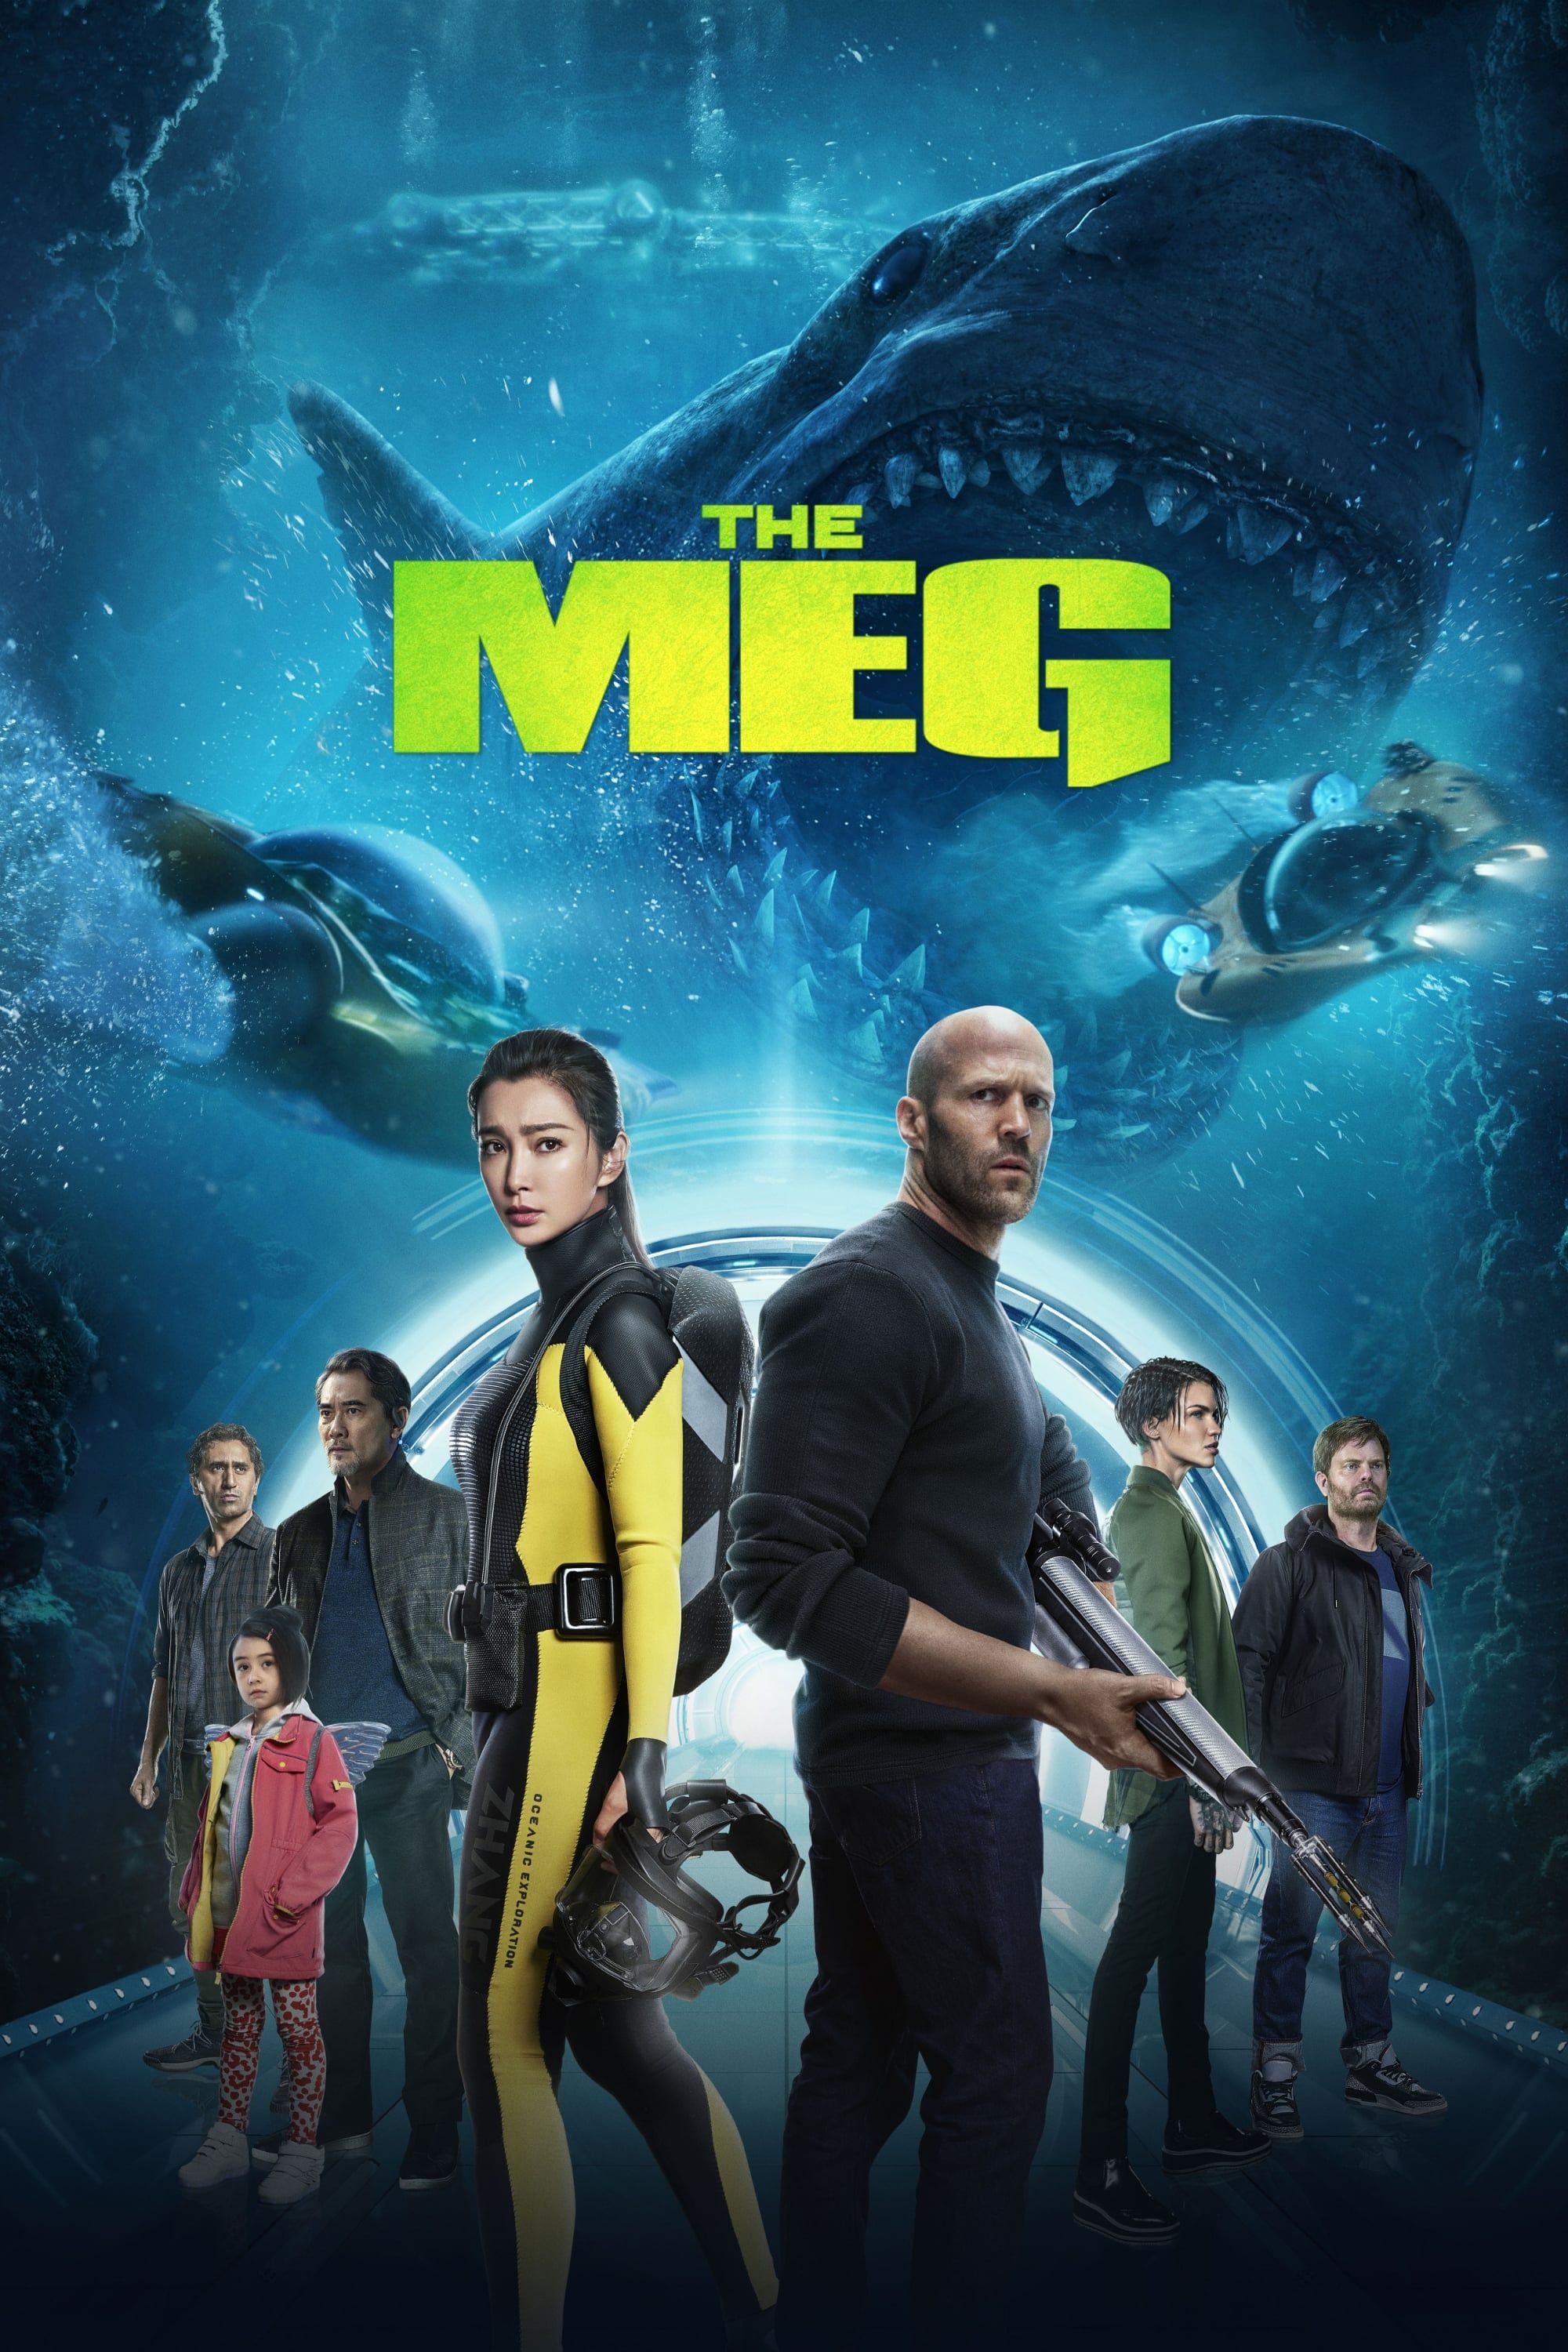 The Meg (2018) Hindi Dubbed Movie download full movie